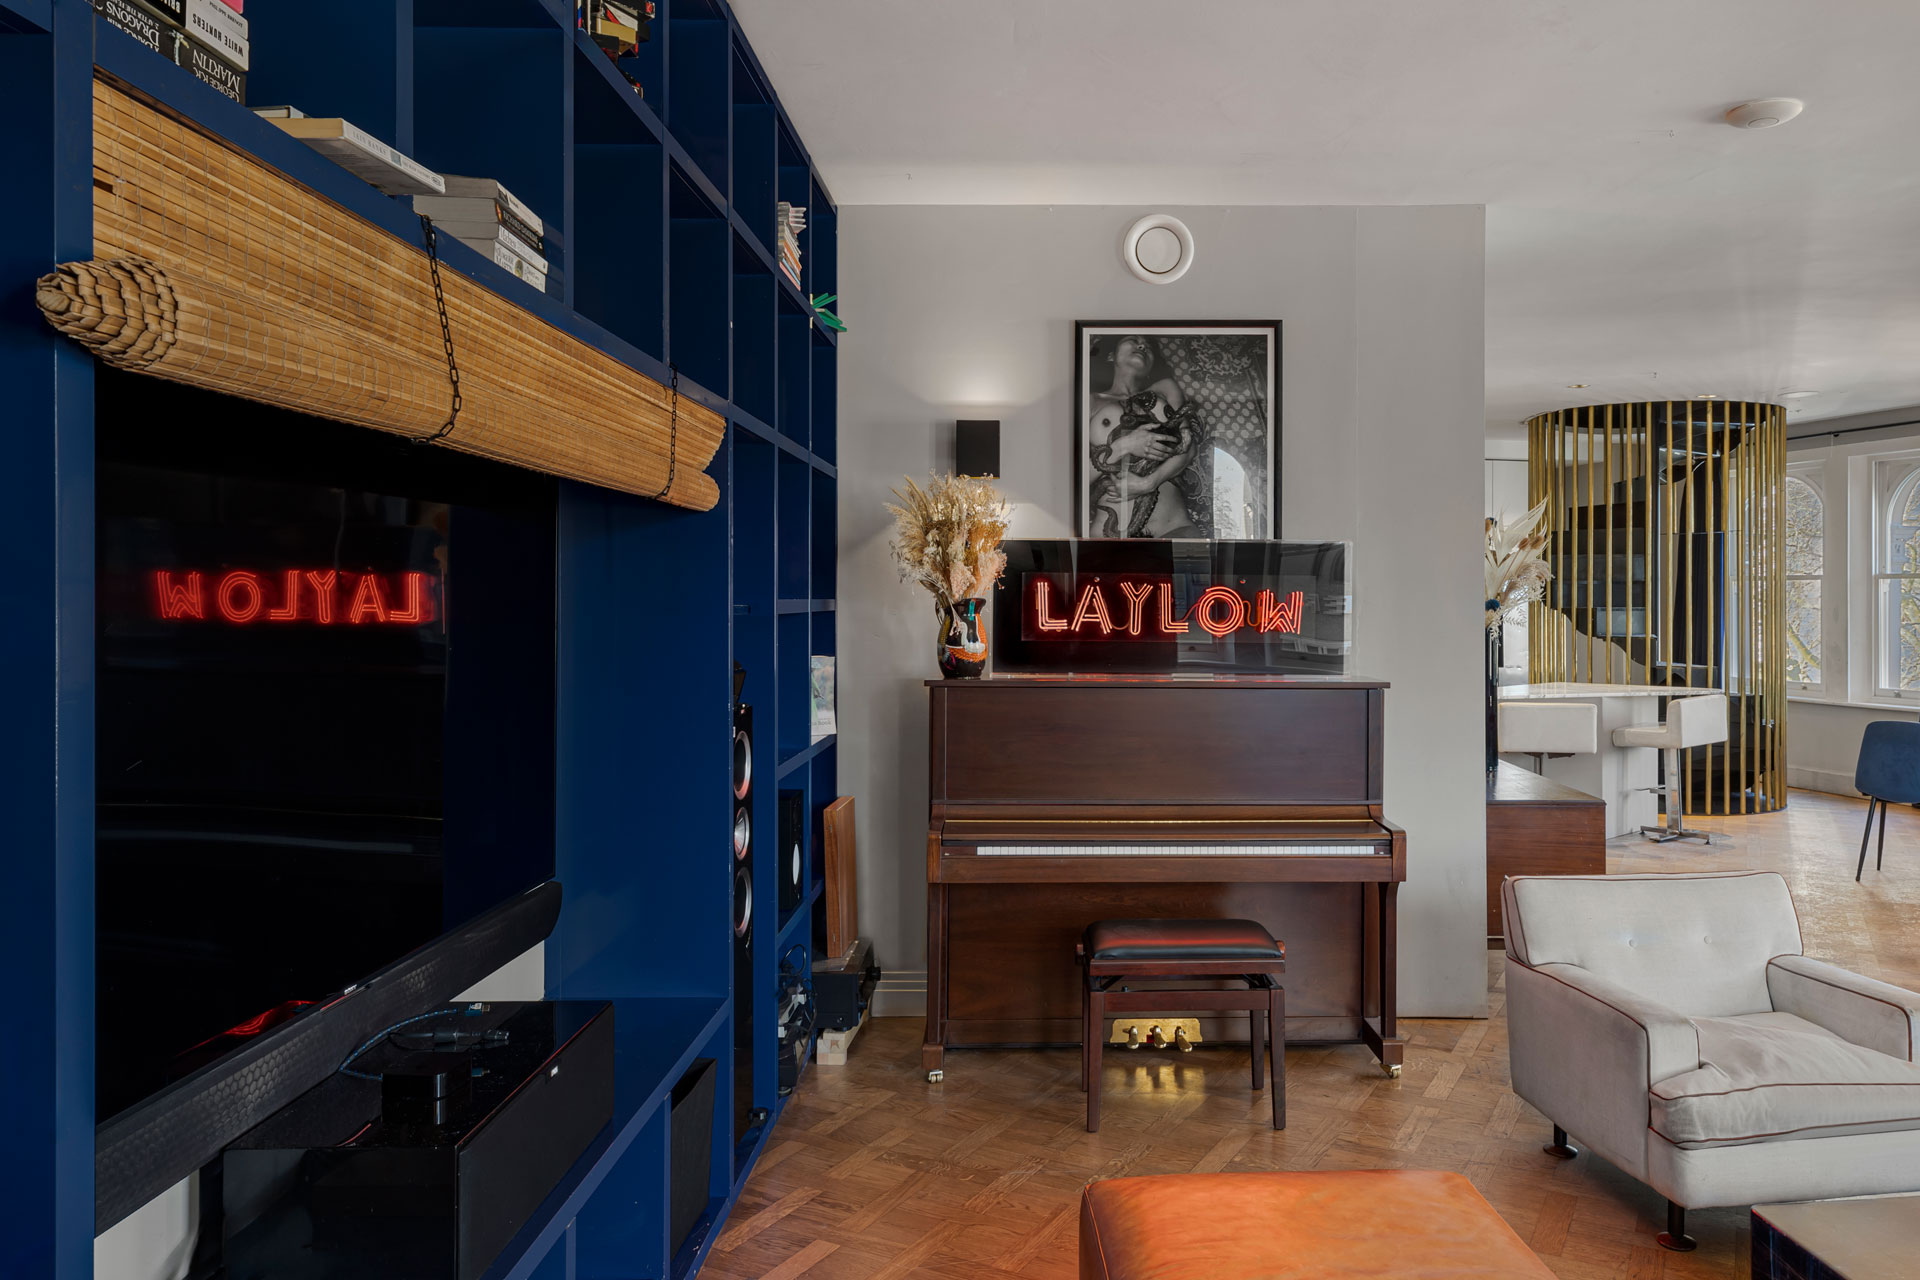 Fancy Moving Into A Members’ Club? This Notting Hill Hotspot Has Just Hit The Market